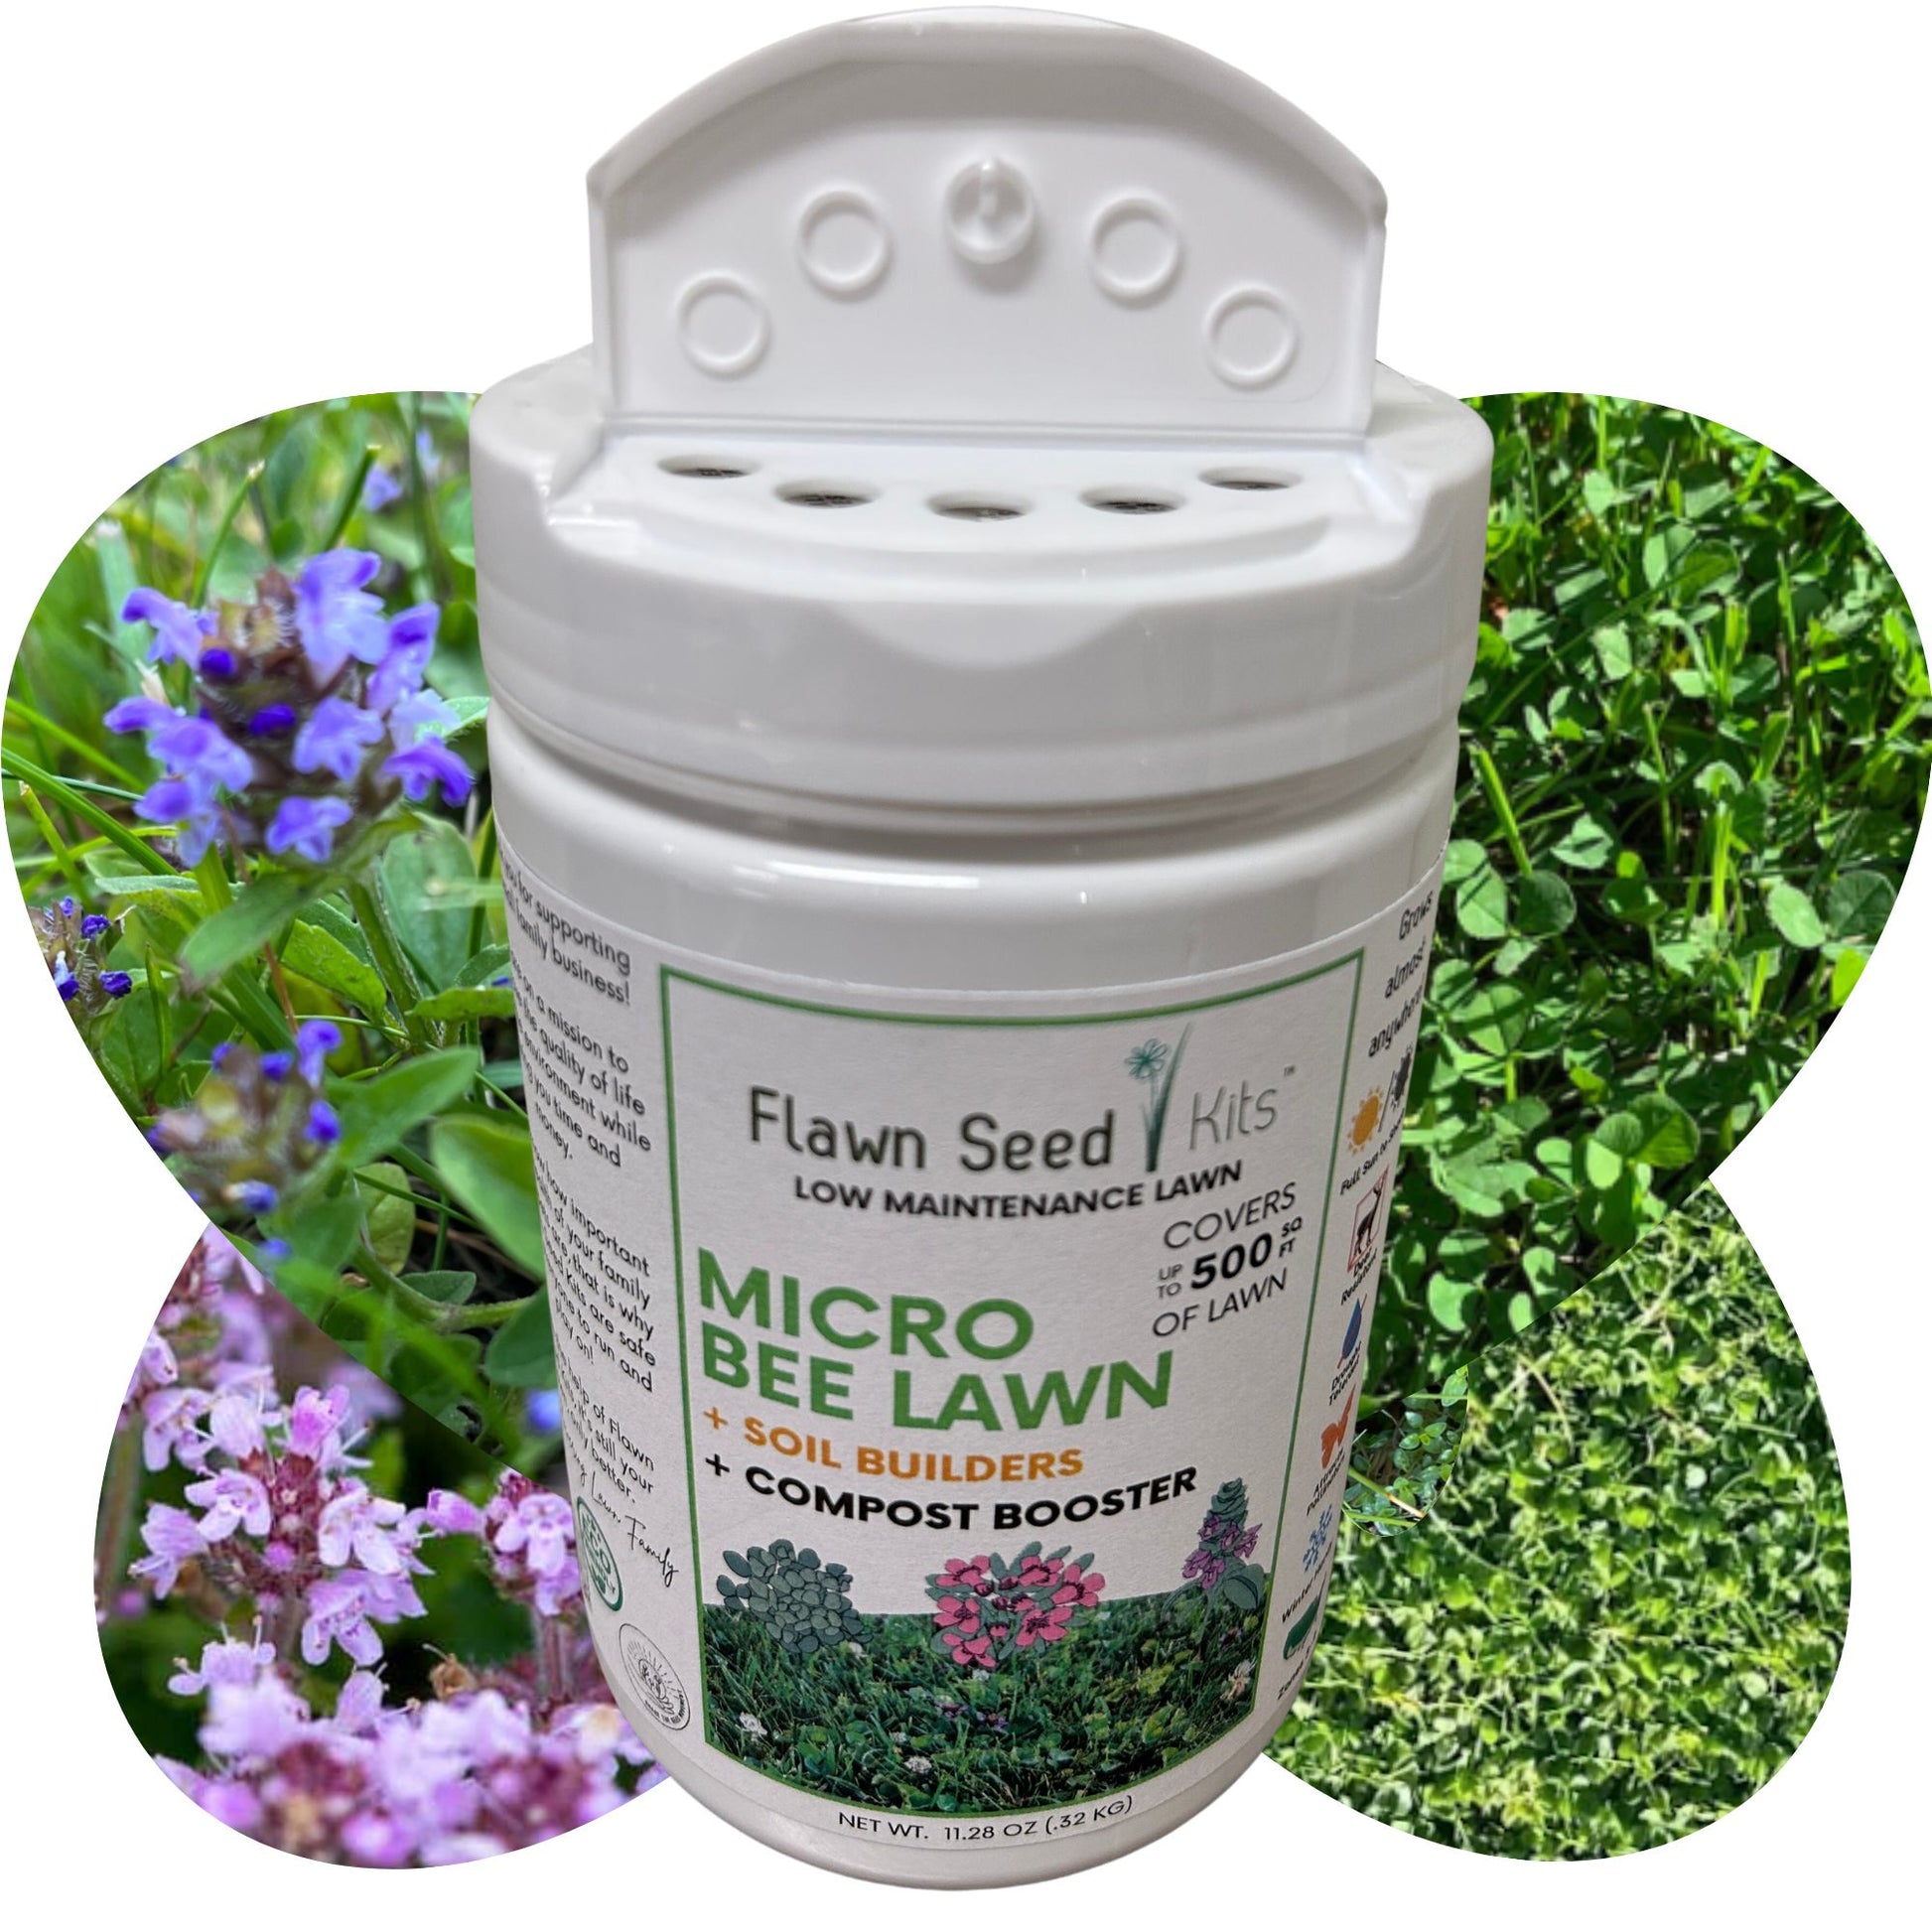 Micro Bee Lawn Flowering Pollinator Seed Kit, Micro Clover Blooms, Self-Heal Blooms, Creeping Thyme Blooms, Easy Spread Container